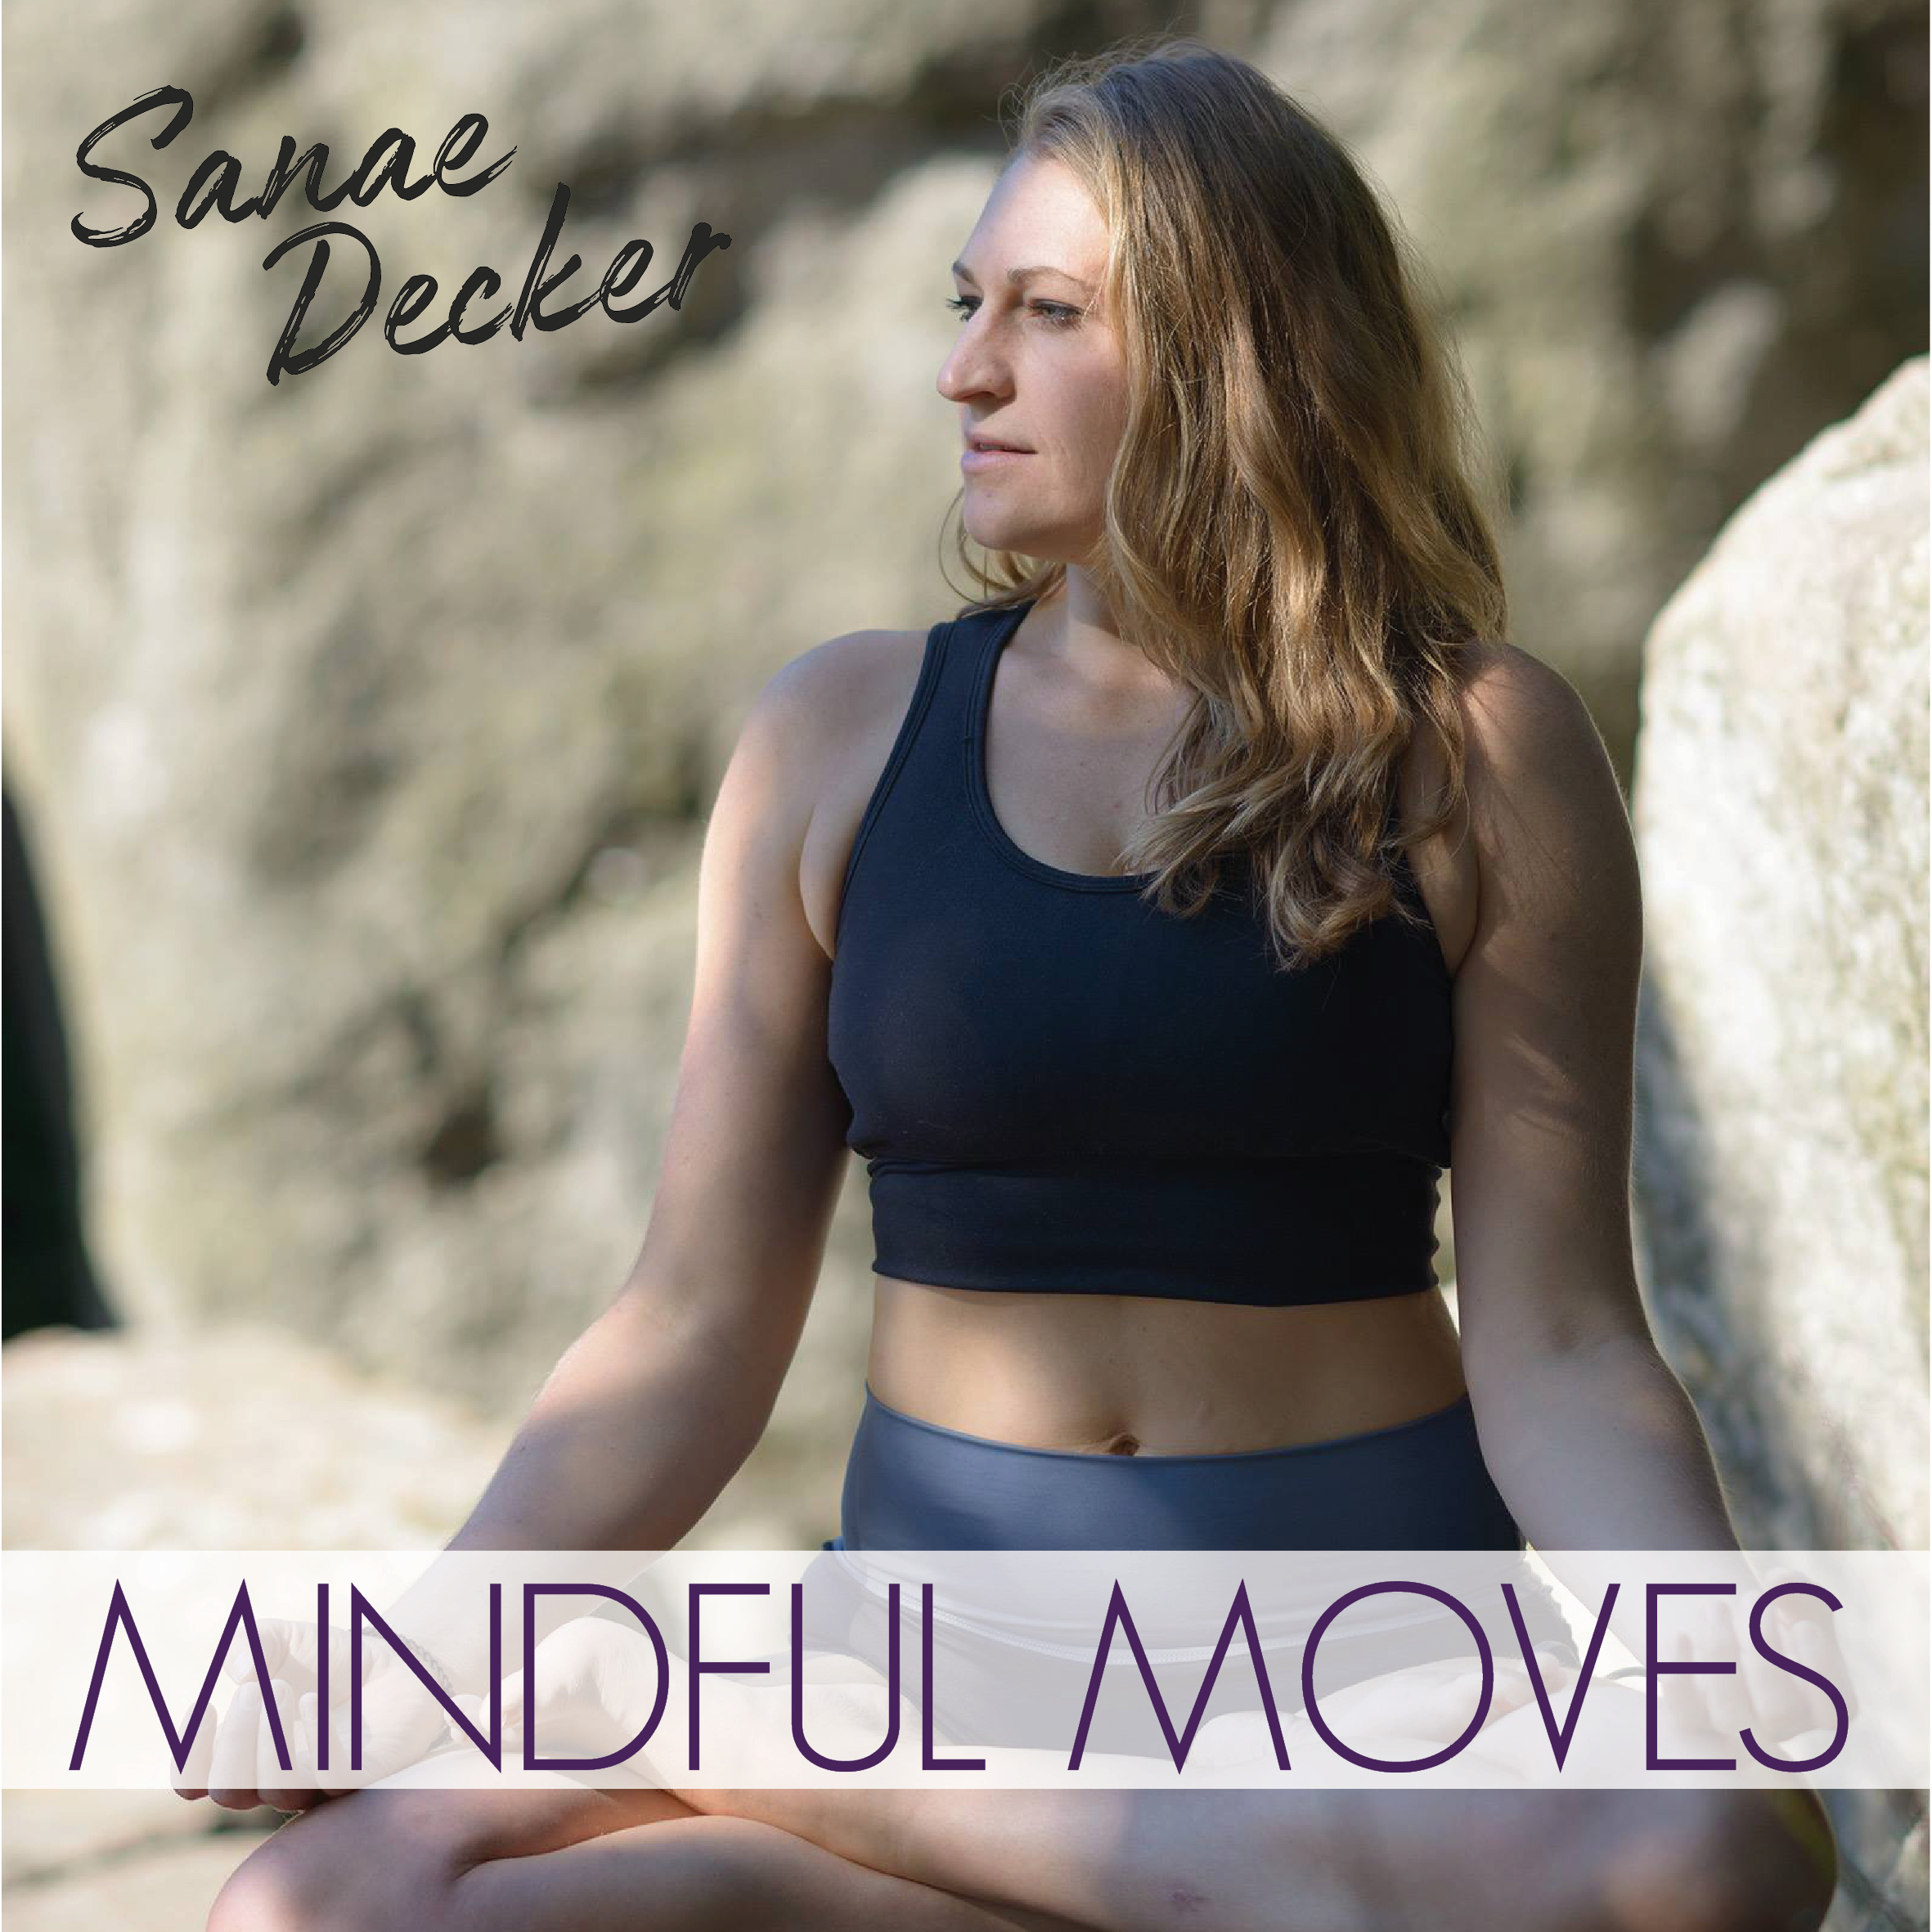 Podcast Mindful Moves